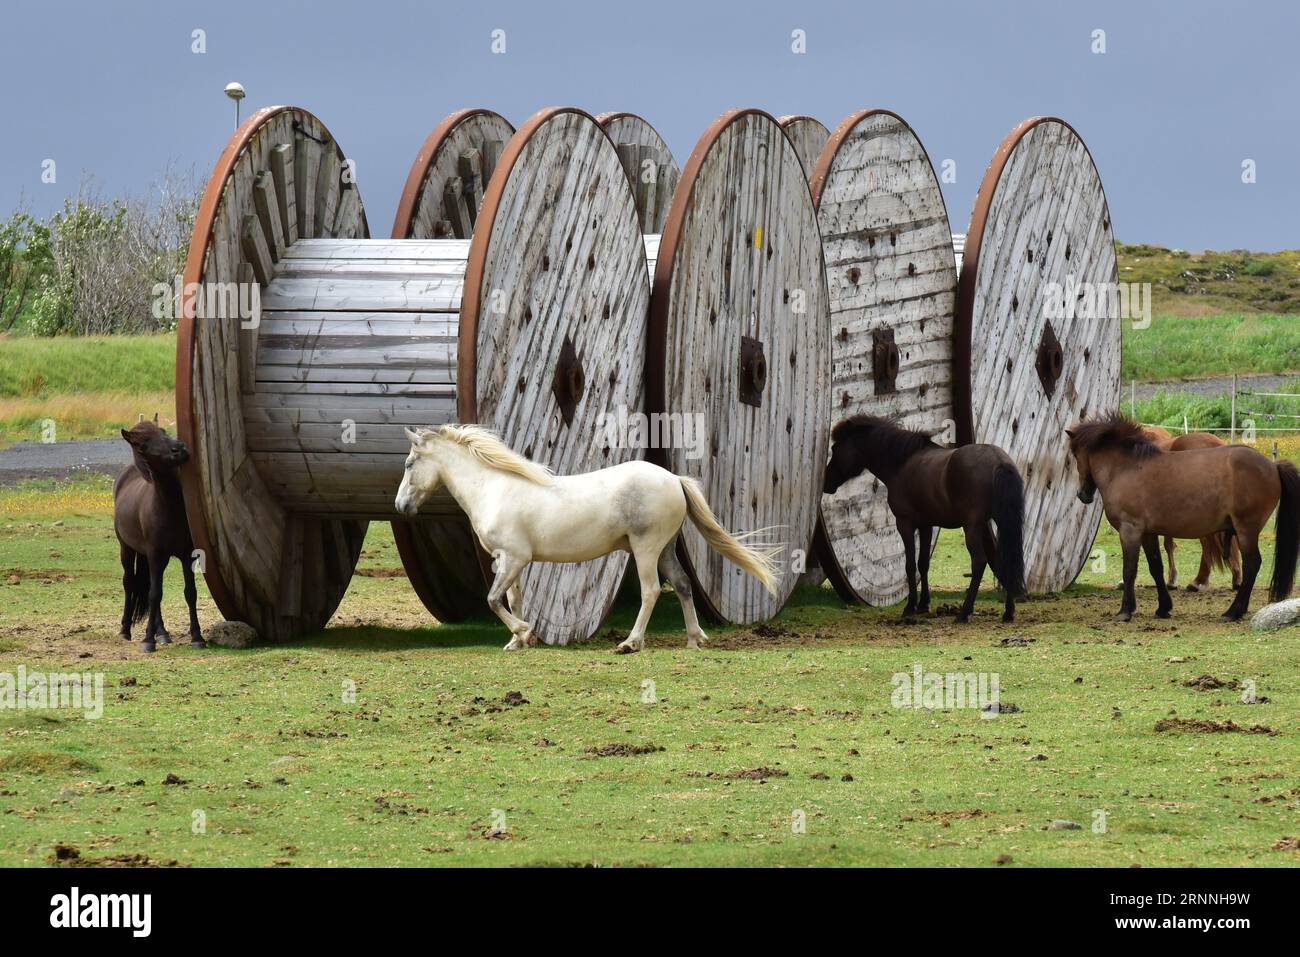 A group of horses running around vintage-style reels in a green field Stock Photo